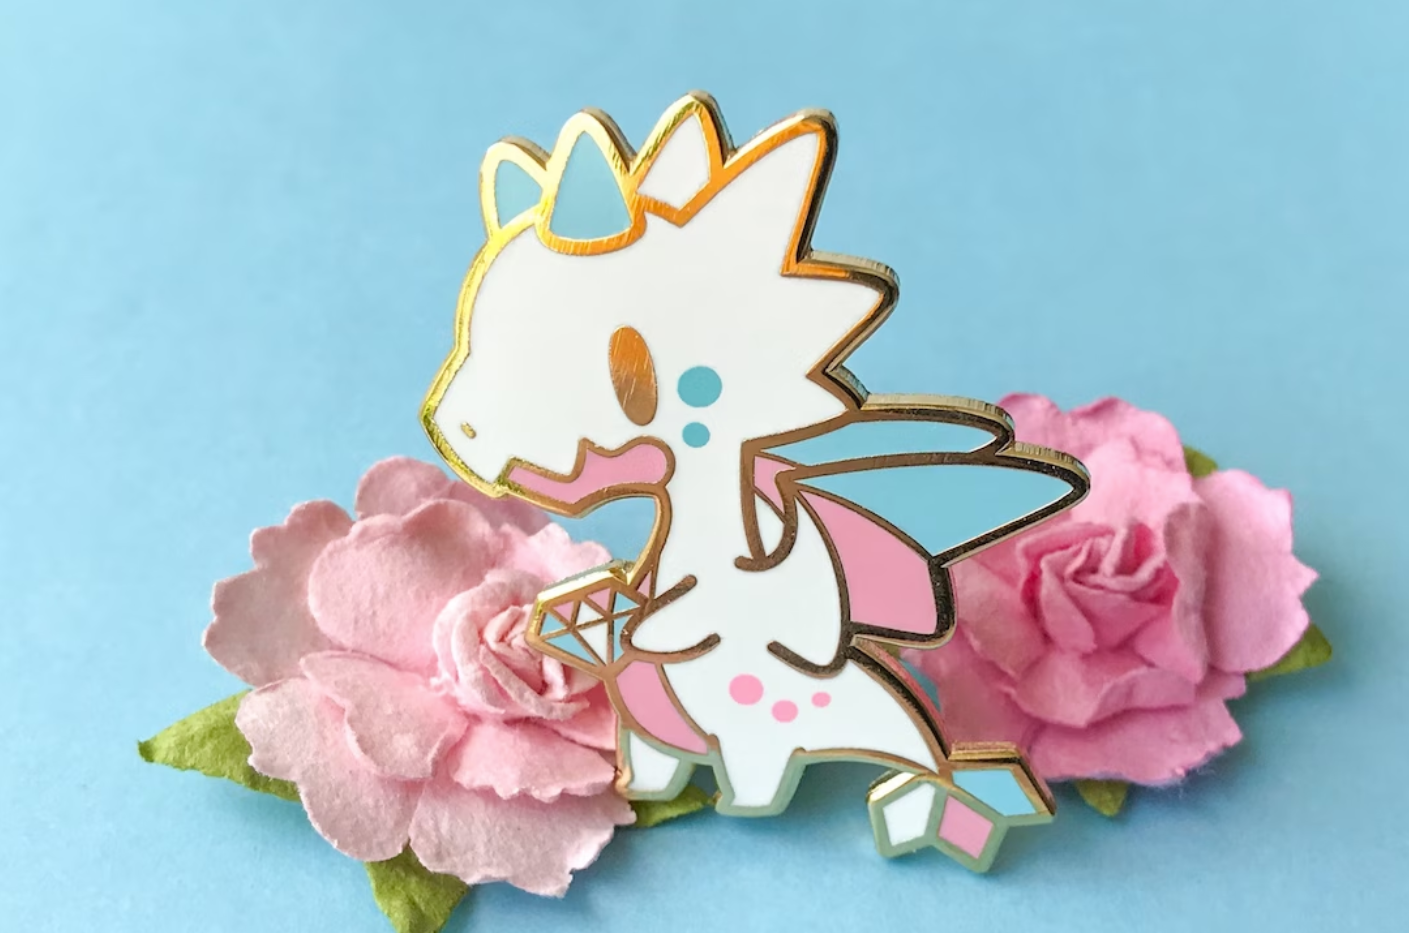 Trans Pride Dragon Enamel Pin with a cute white, pink and blue kawaii dragon holding a gemstone